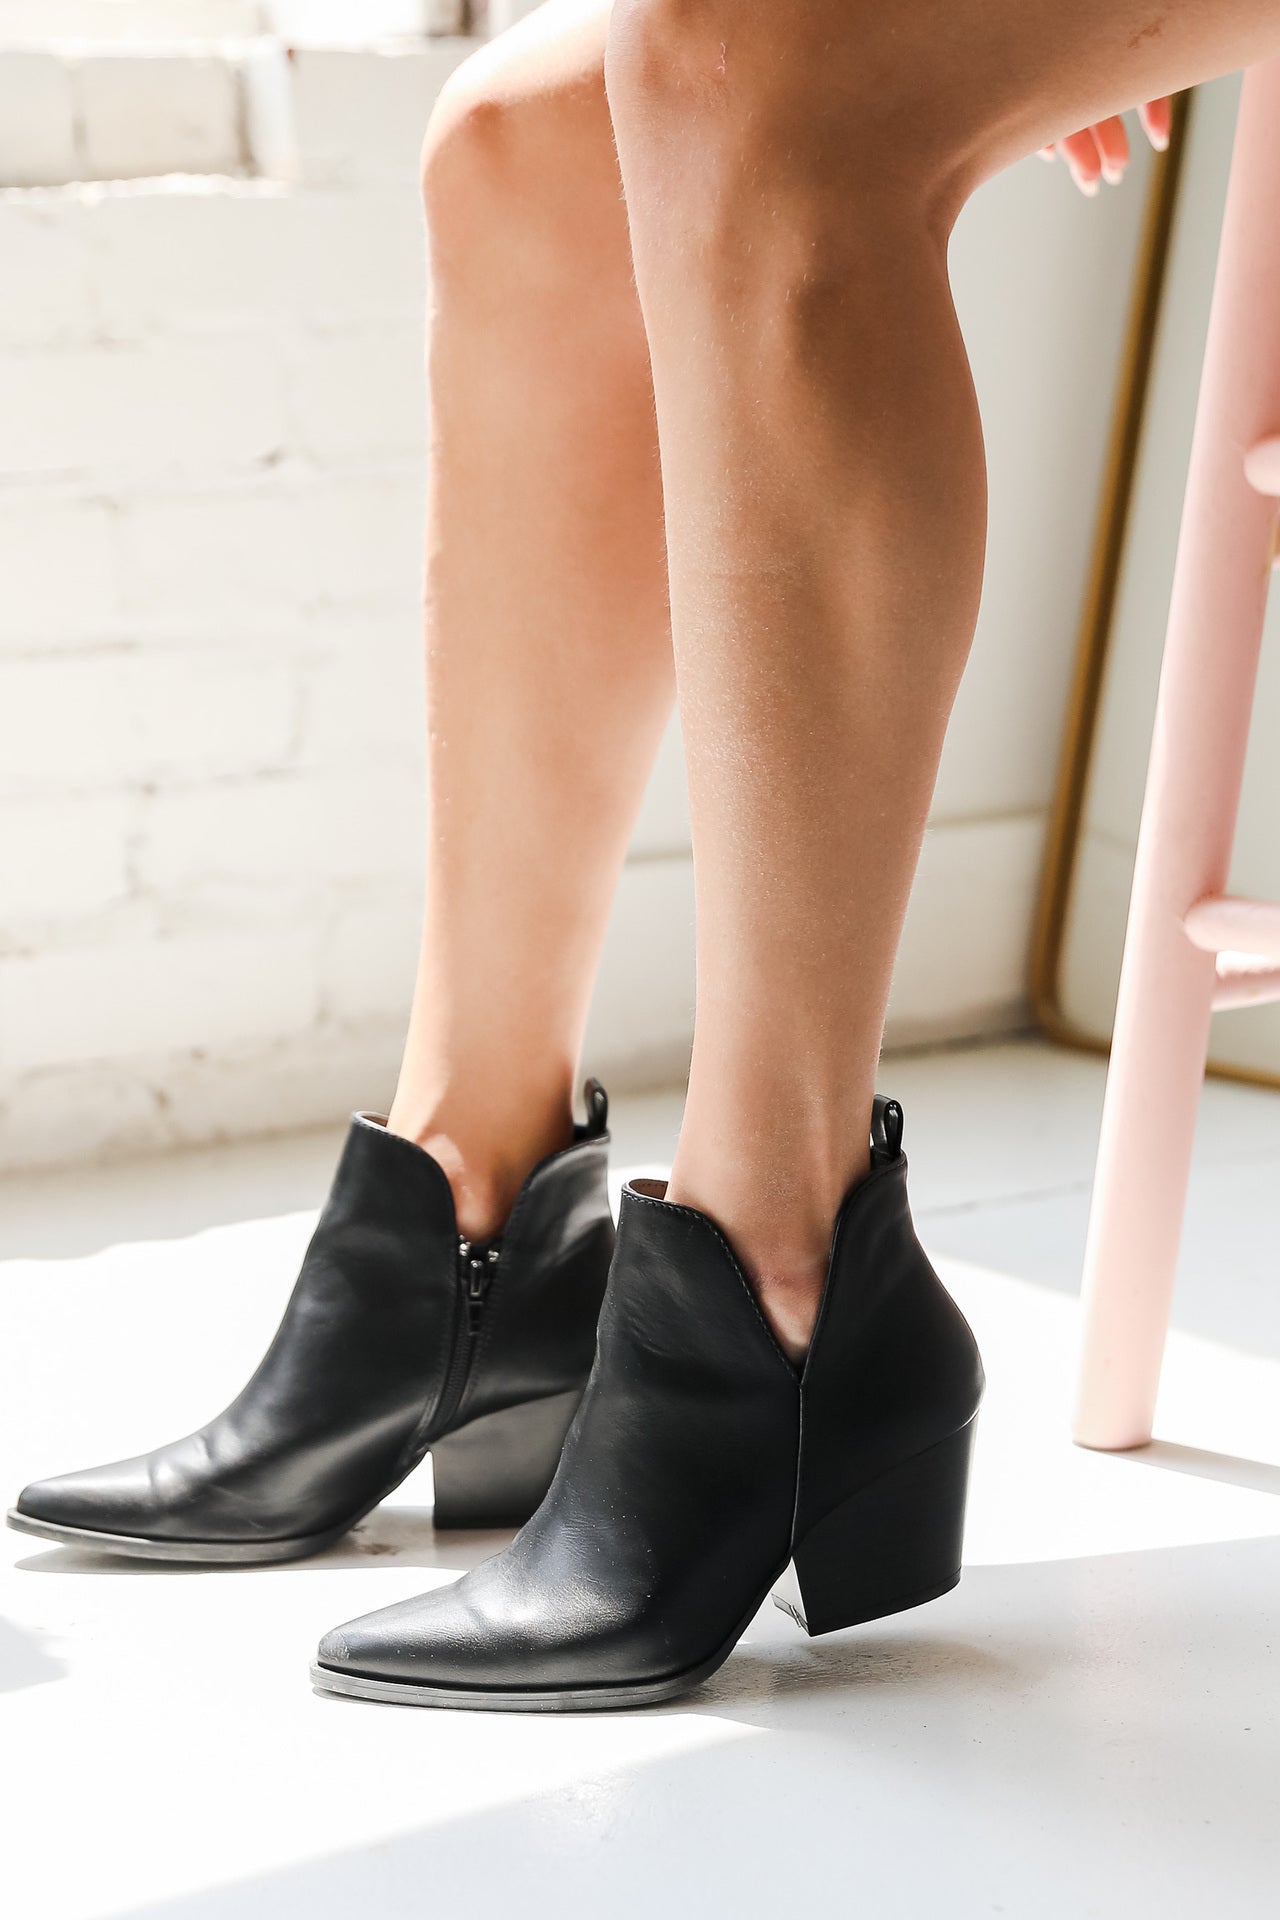 model wearing black faux leather pointed toe heeled ankle booties